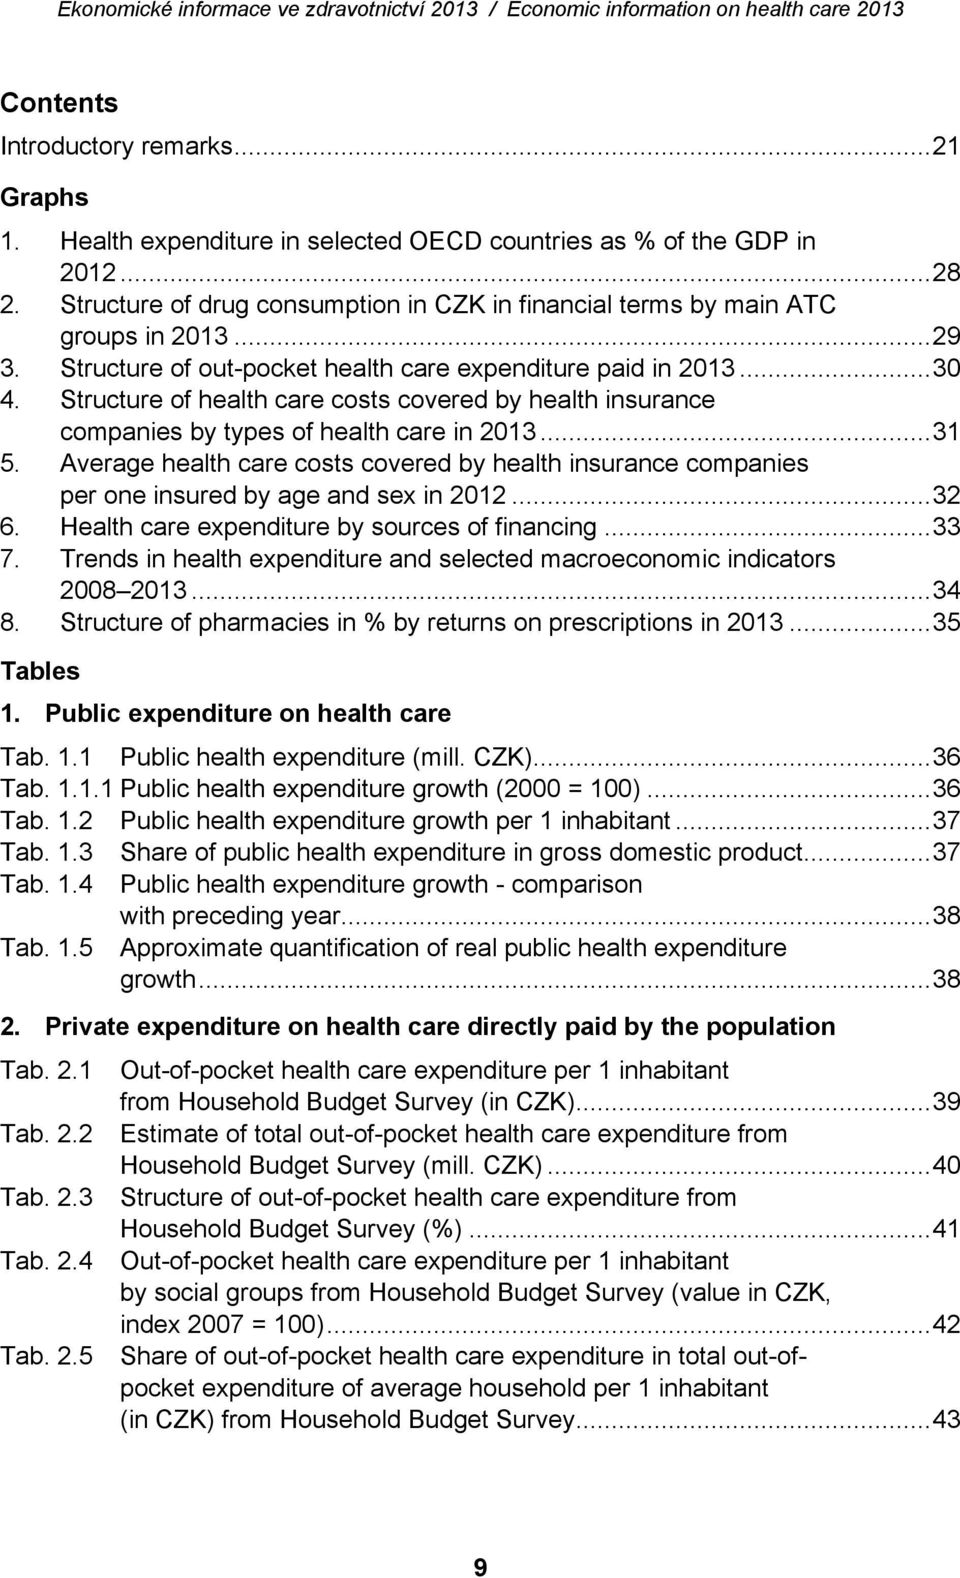 Structure of health care costs covered by health insurance companies by types of health care in 2013... 31 5.